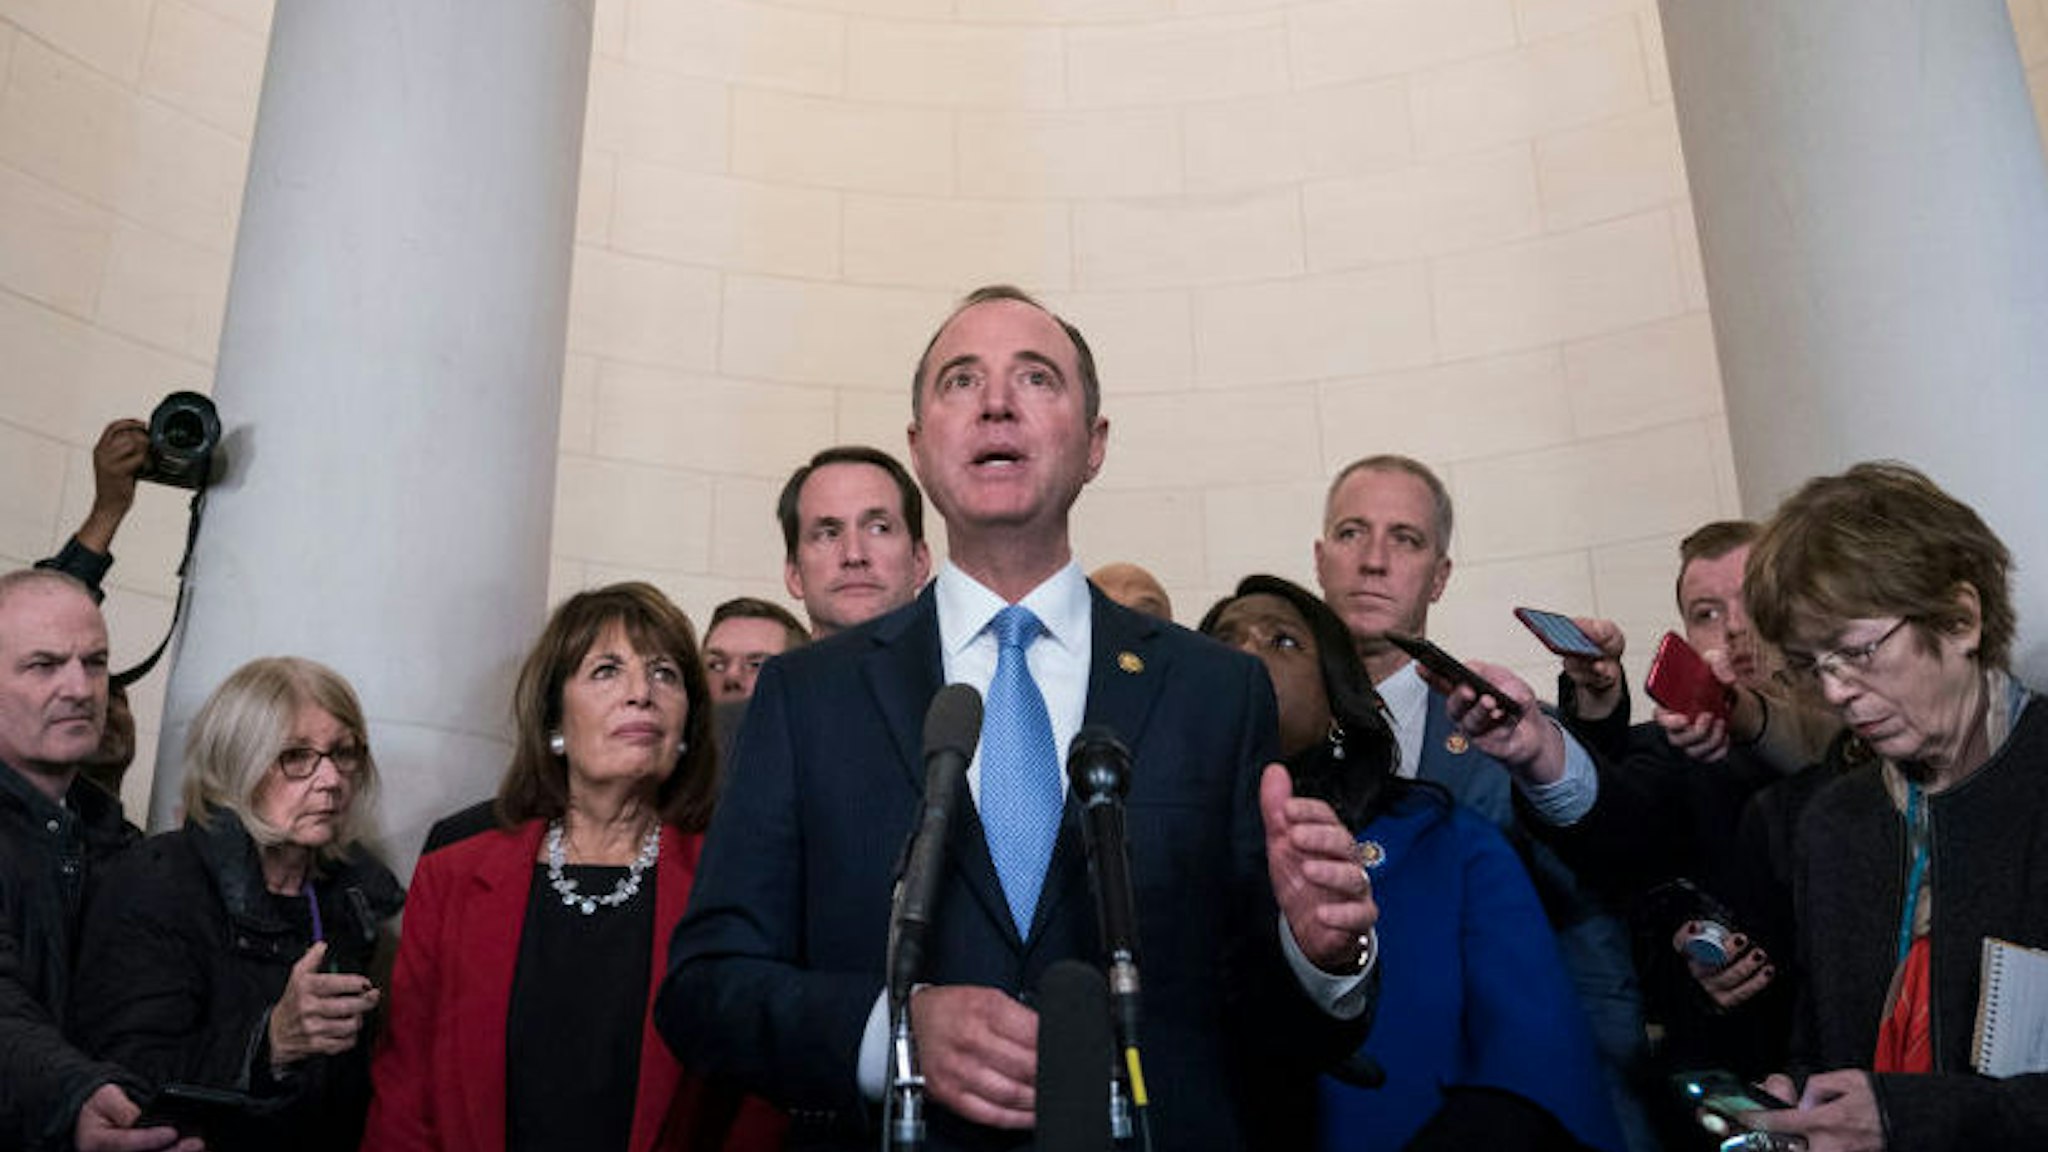 Representative Adam Schiff, a Democrat from California and chairman of the House Intelligence Committee, answers questions from members of the media after a House Intelligence Committee impeachment inquiry hearing in Washington, D.C., U.S., on Wednesday, Nov. 13, 2019. In the first public impeachment hearings in more than two decades, House Democrats are trying to build a case that President Donald Trump committed extortion, bribery or coercion by trying to enlist Ukraine to investigate his political rival in exchange for military aide and a White House meeting that Ukraine President Volodymyr Zelensky sought with Trump. (Photo by Sarah Silbiger/Getty Images)